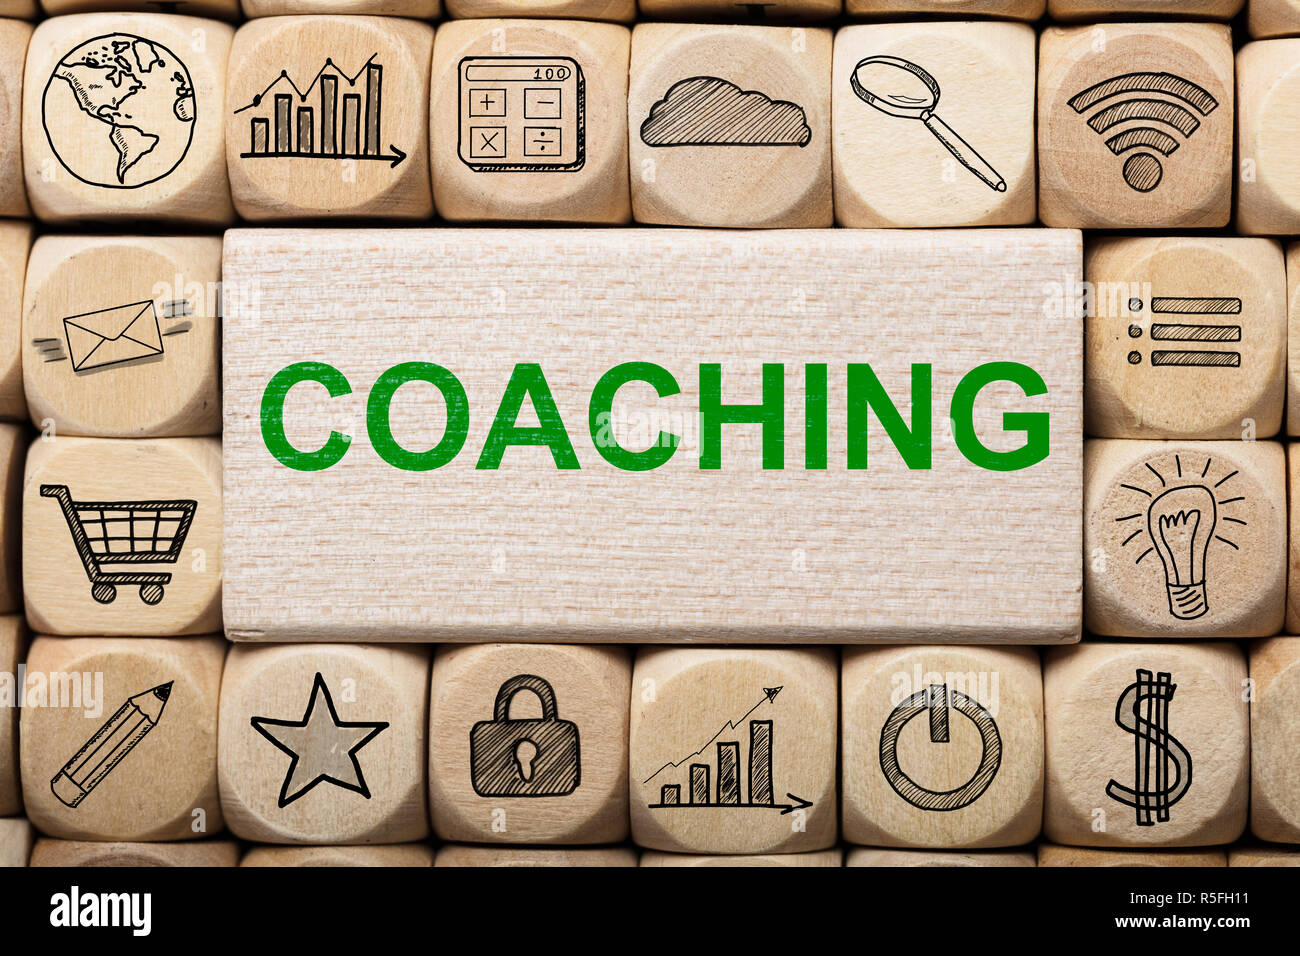 Coaching Text On Wooden Block Surrounded By Computer Icons Stock Photo